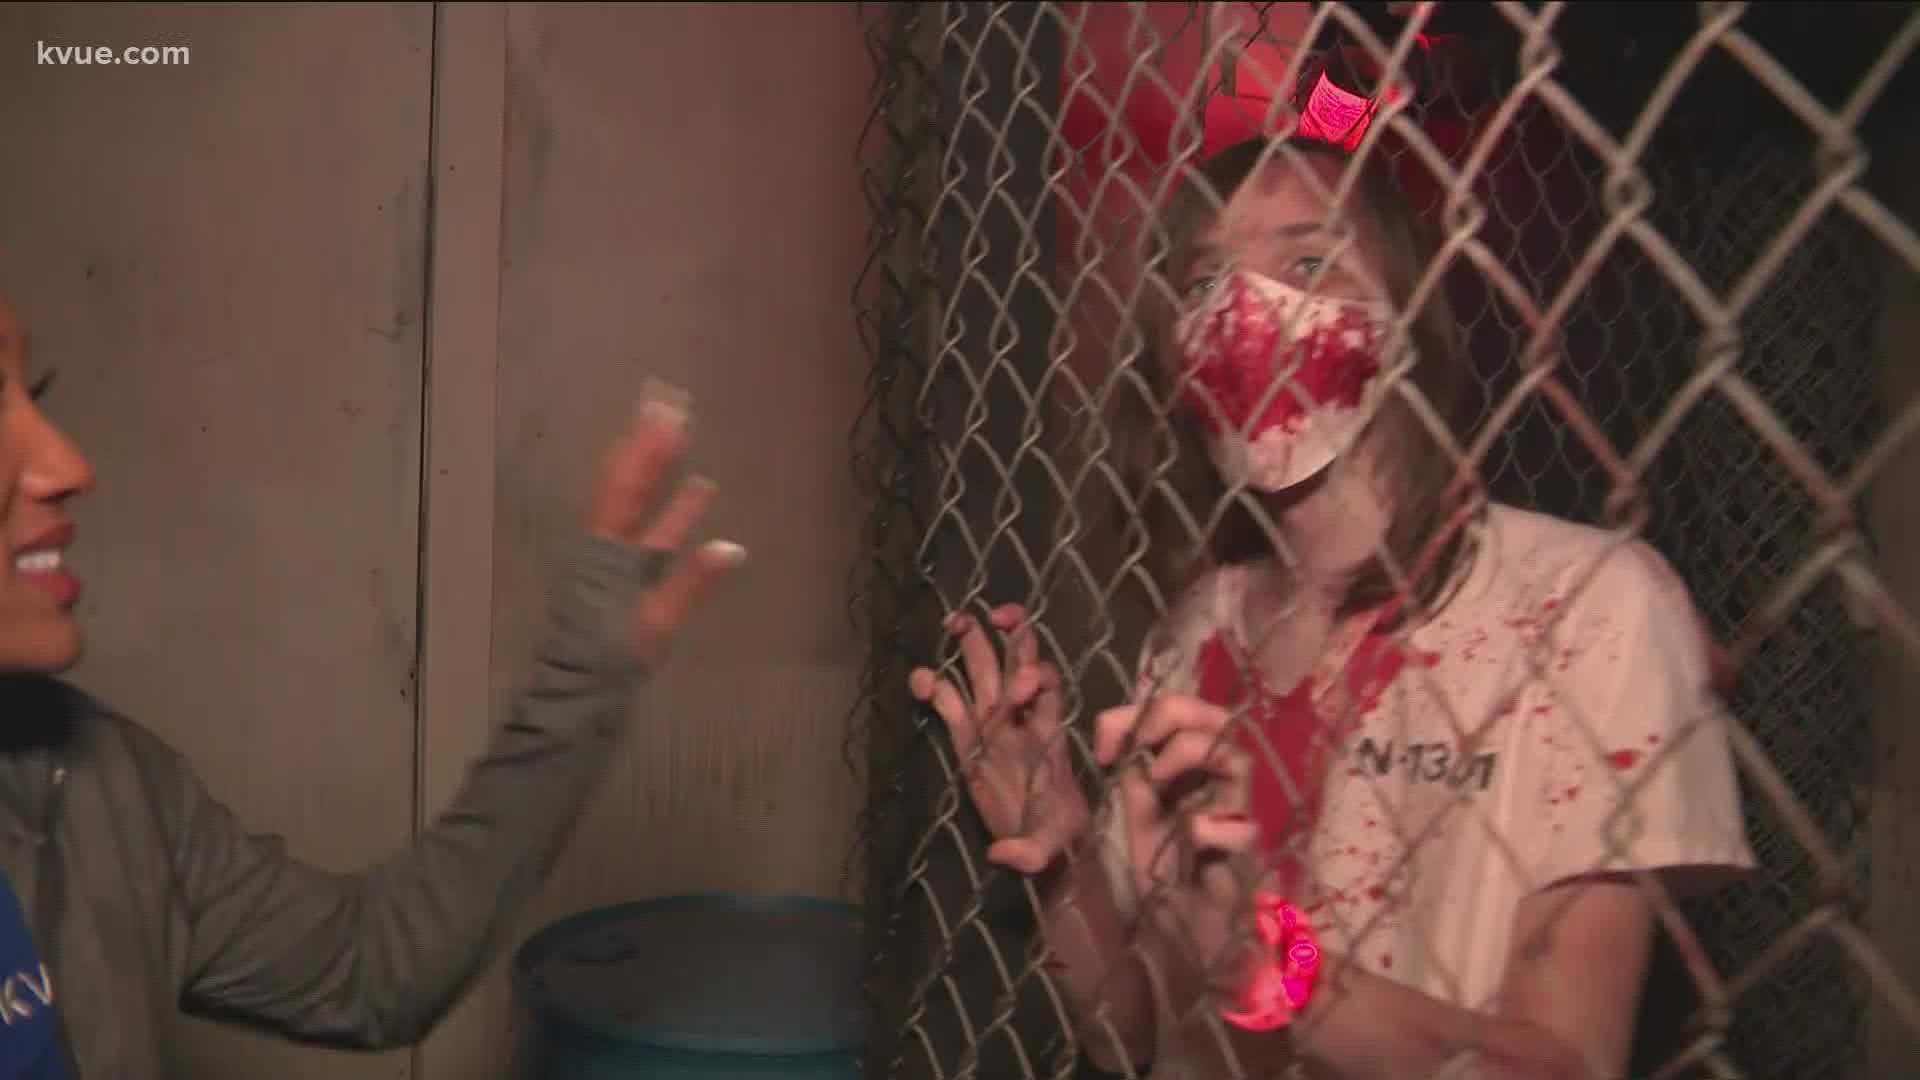 Half of the proceeds will go to charities and the Breast Cancer Resource Center. KVUE's own Daranesha Herron walks through the interactive haunted house.